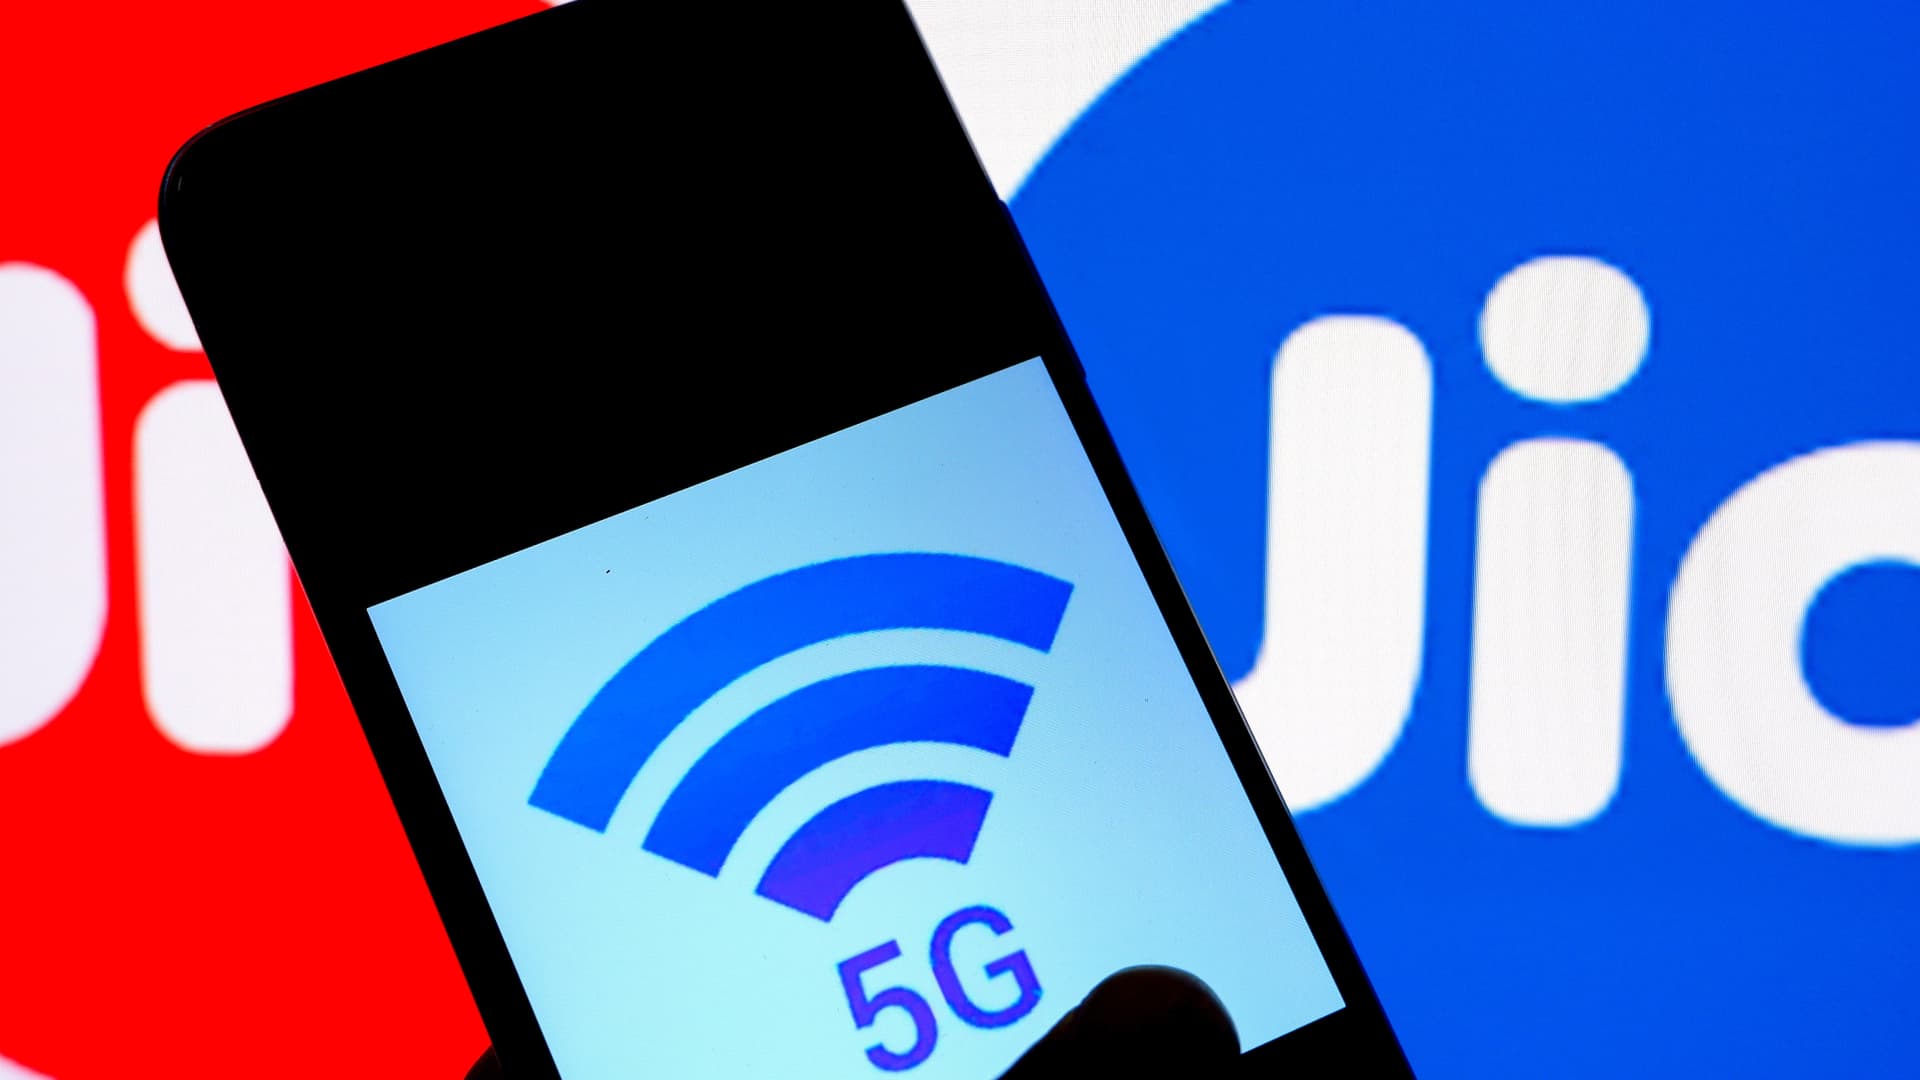 India 5G race will be between Reliance and Bharti Airtel: Sanjay Kapoor